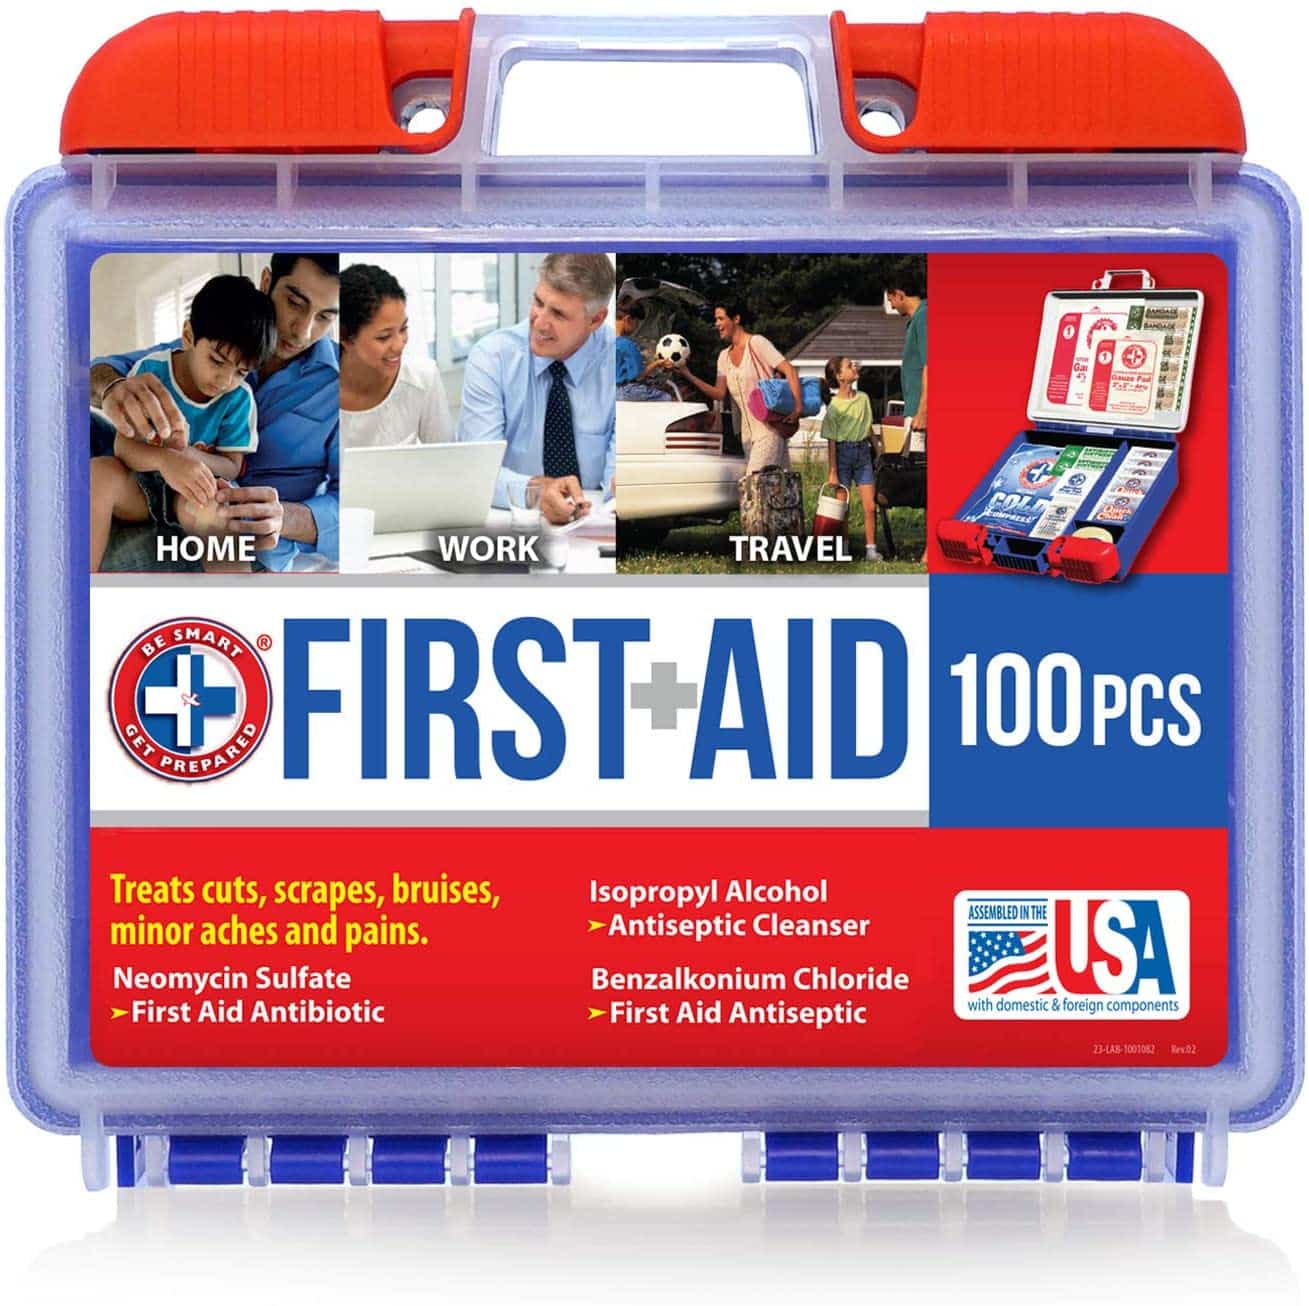 Even simple injuries require care which you can access with a first aid kit